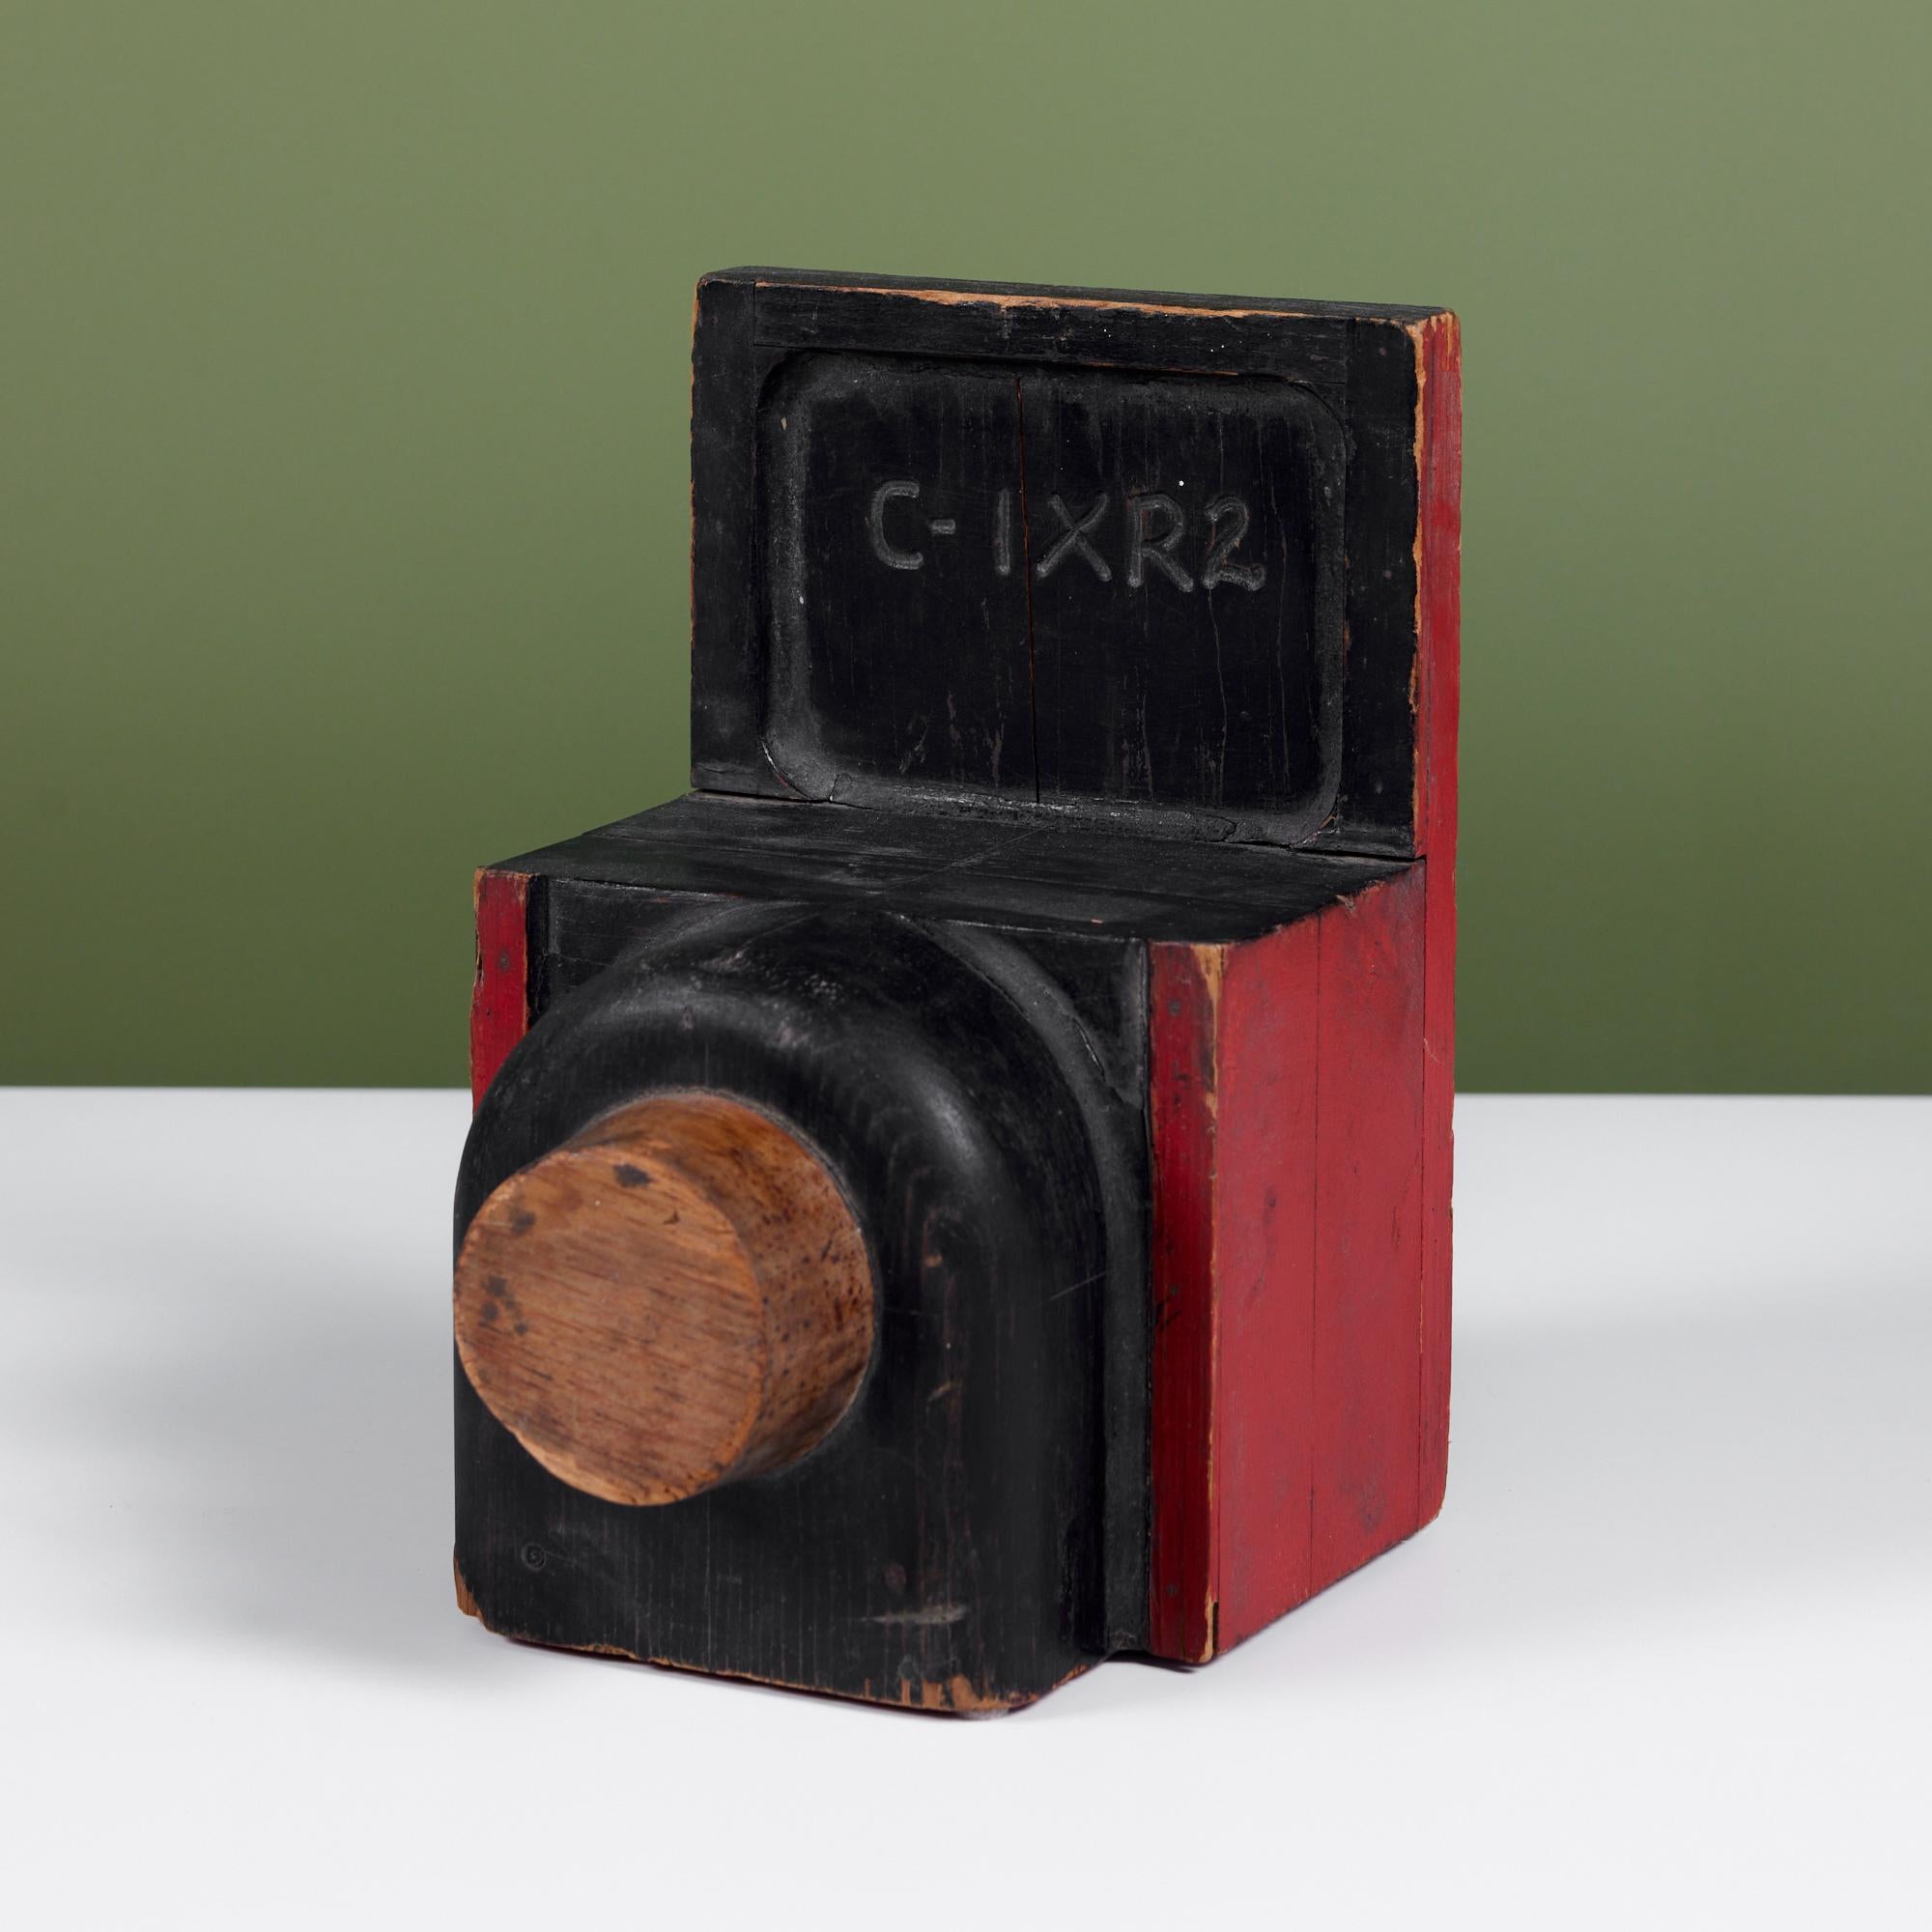 Hand carved wood camera. This playful sculpture features a painted body in black and red with the carving 